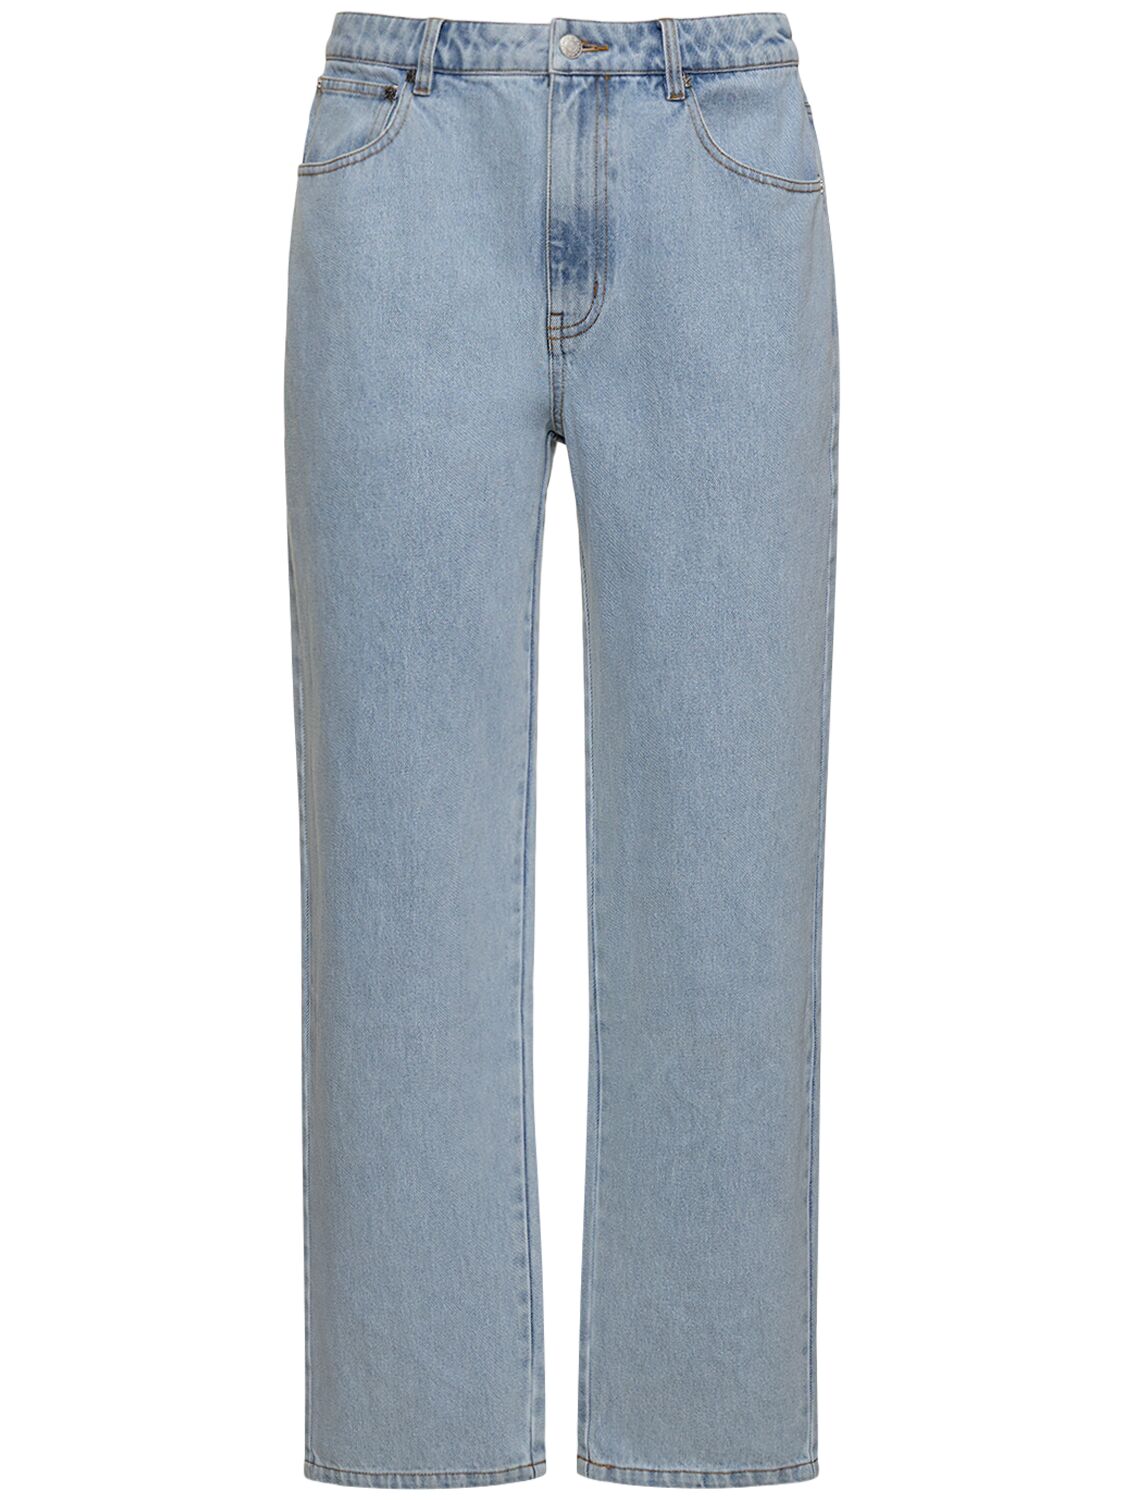 Image of Embroidered Dagger Baggy Denim Jeans